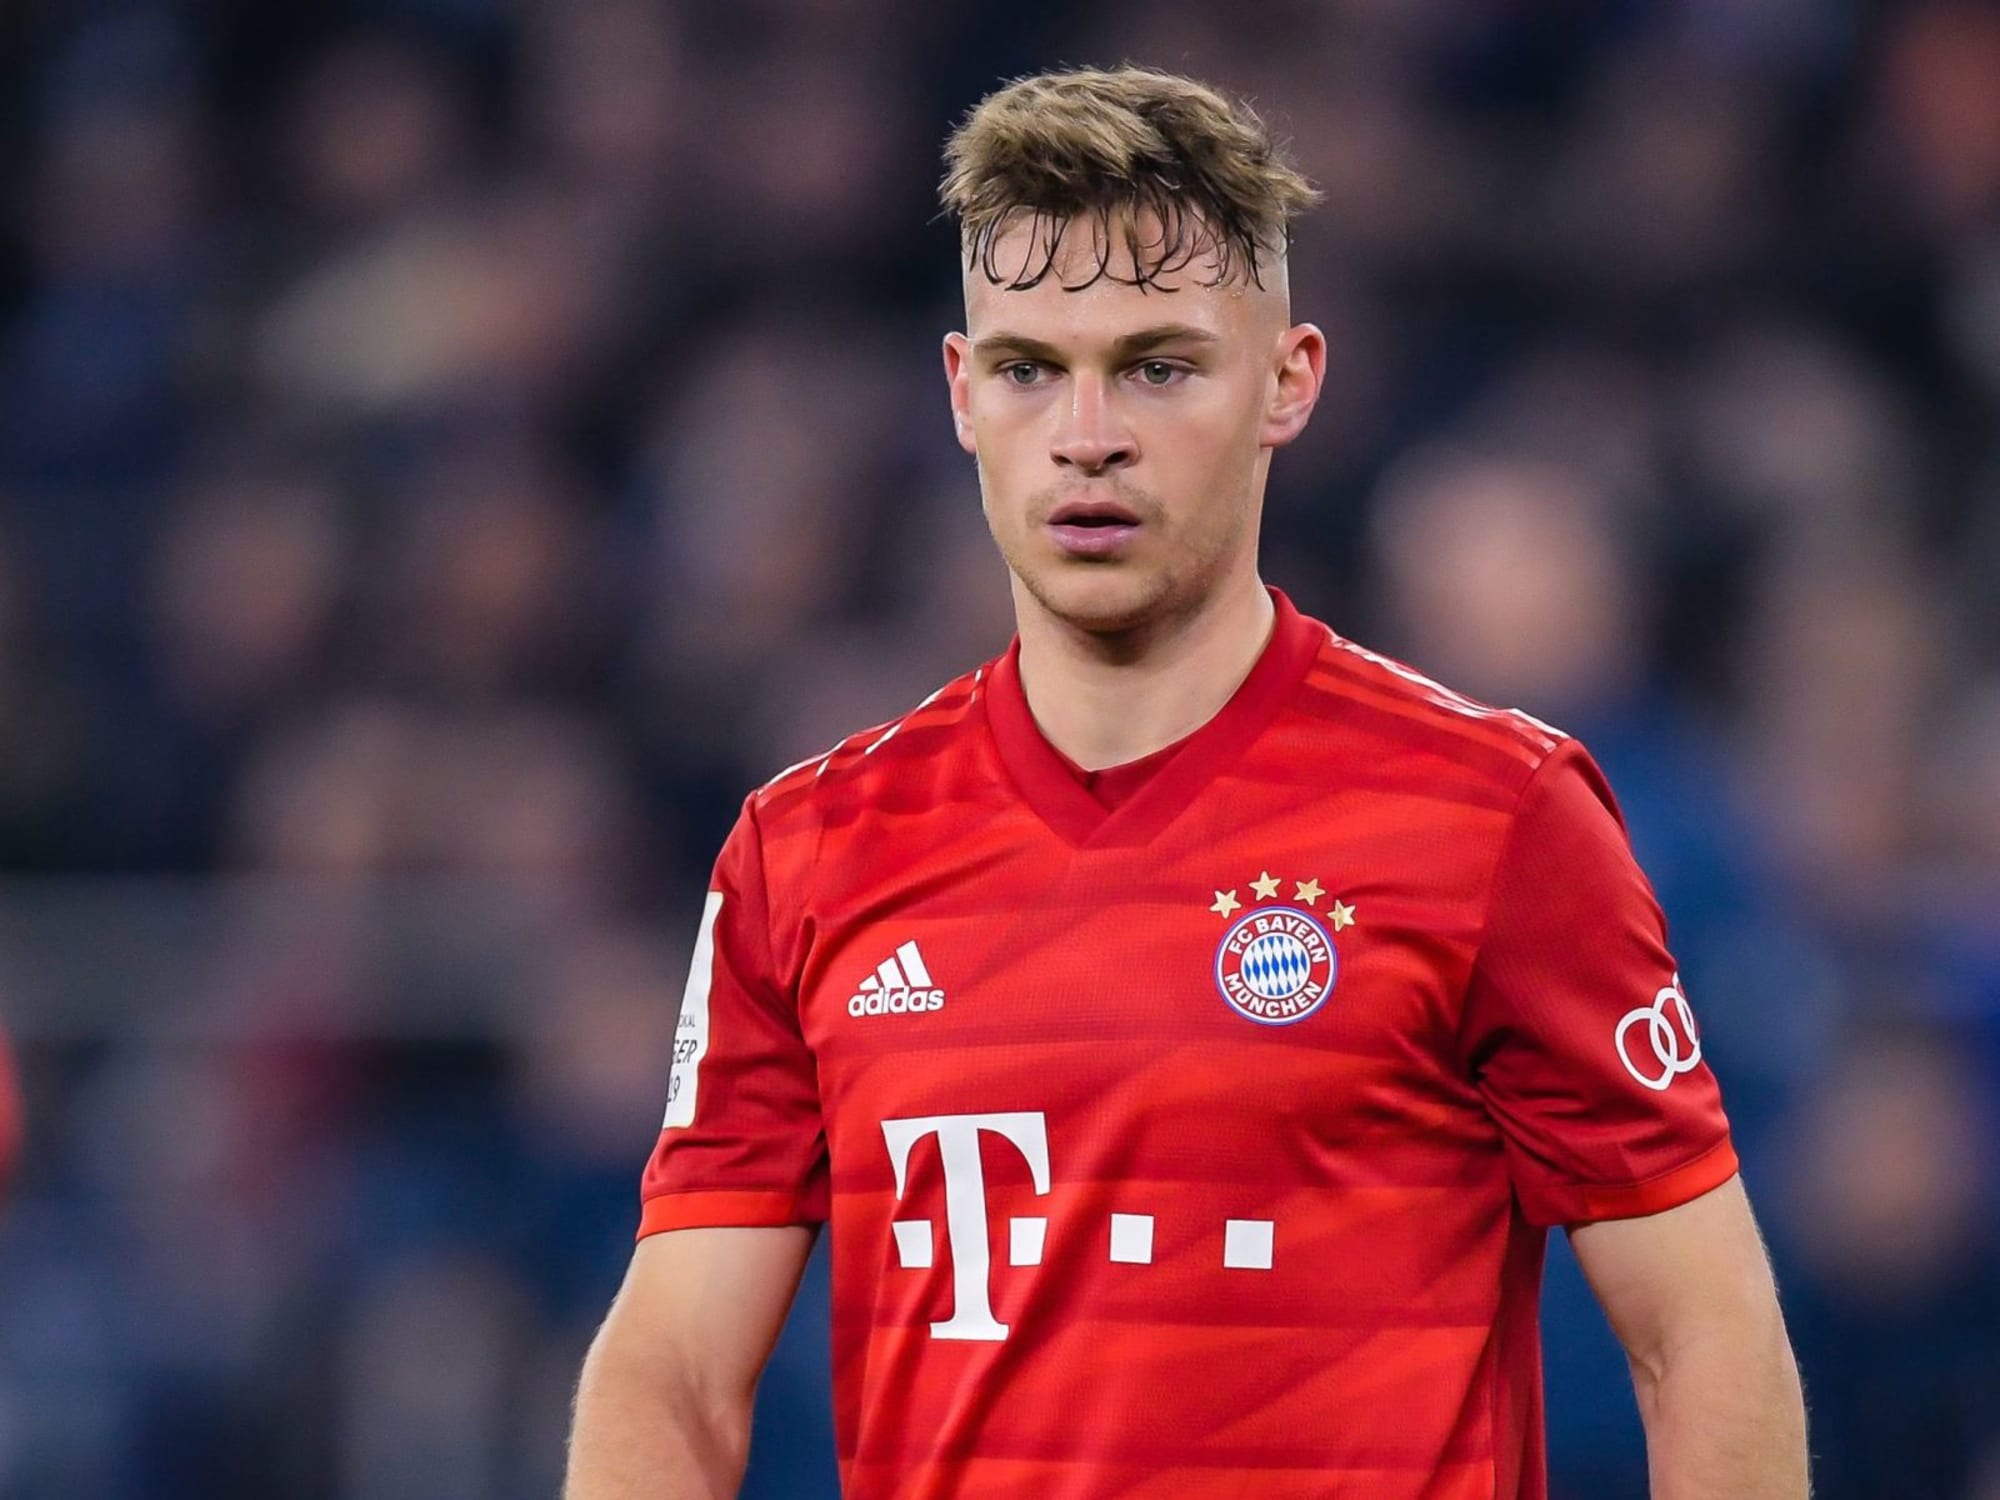  Joshua Kimmich is a Bayern Munich player who was named Bundesliga Player of the Week.